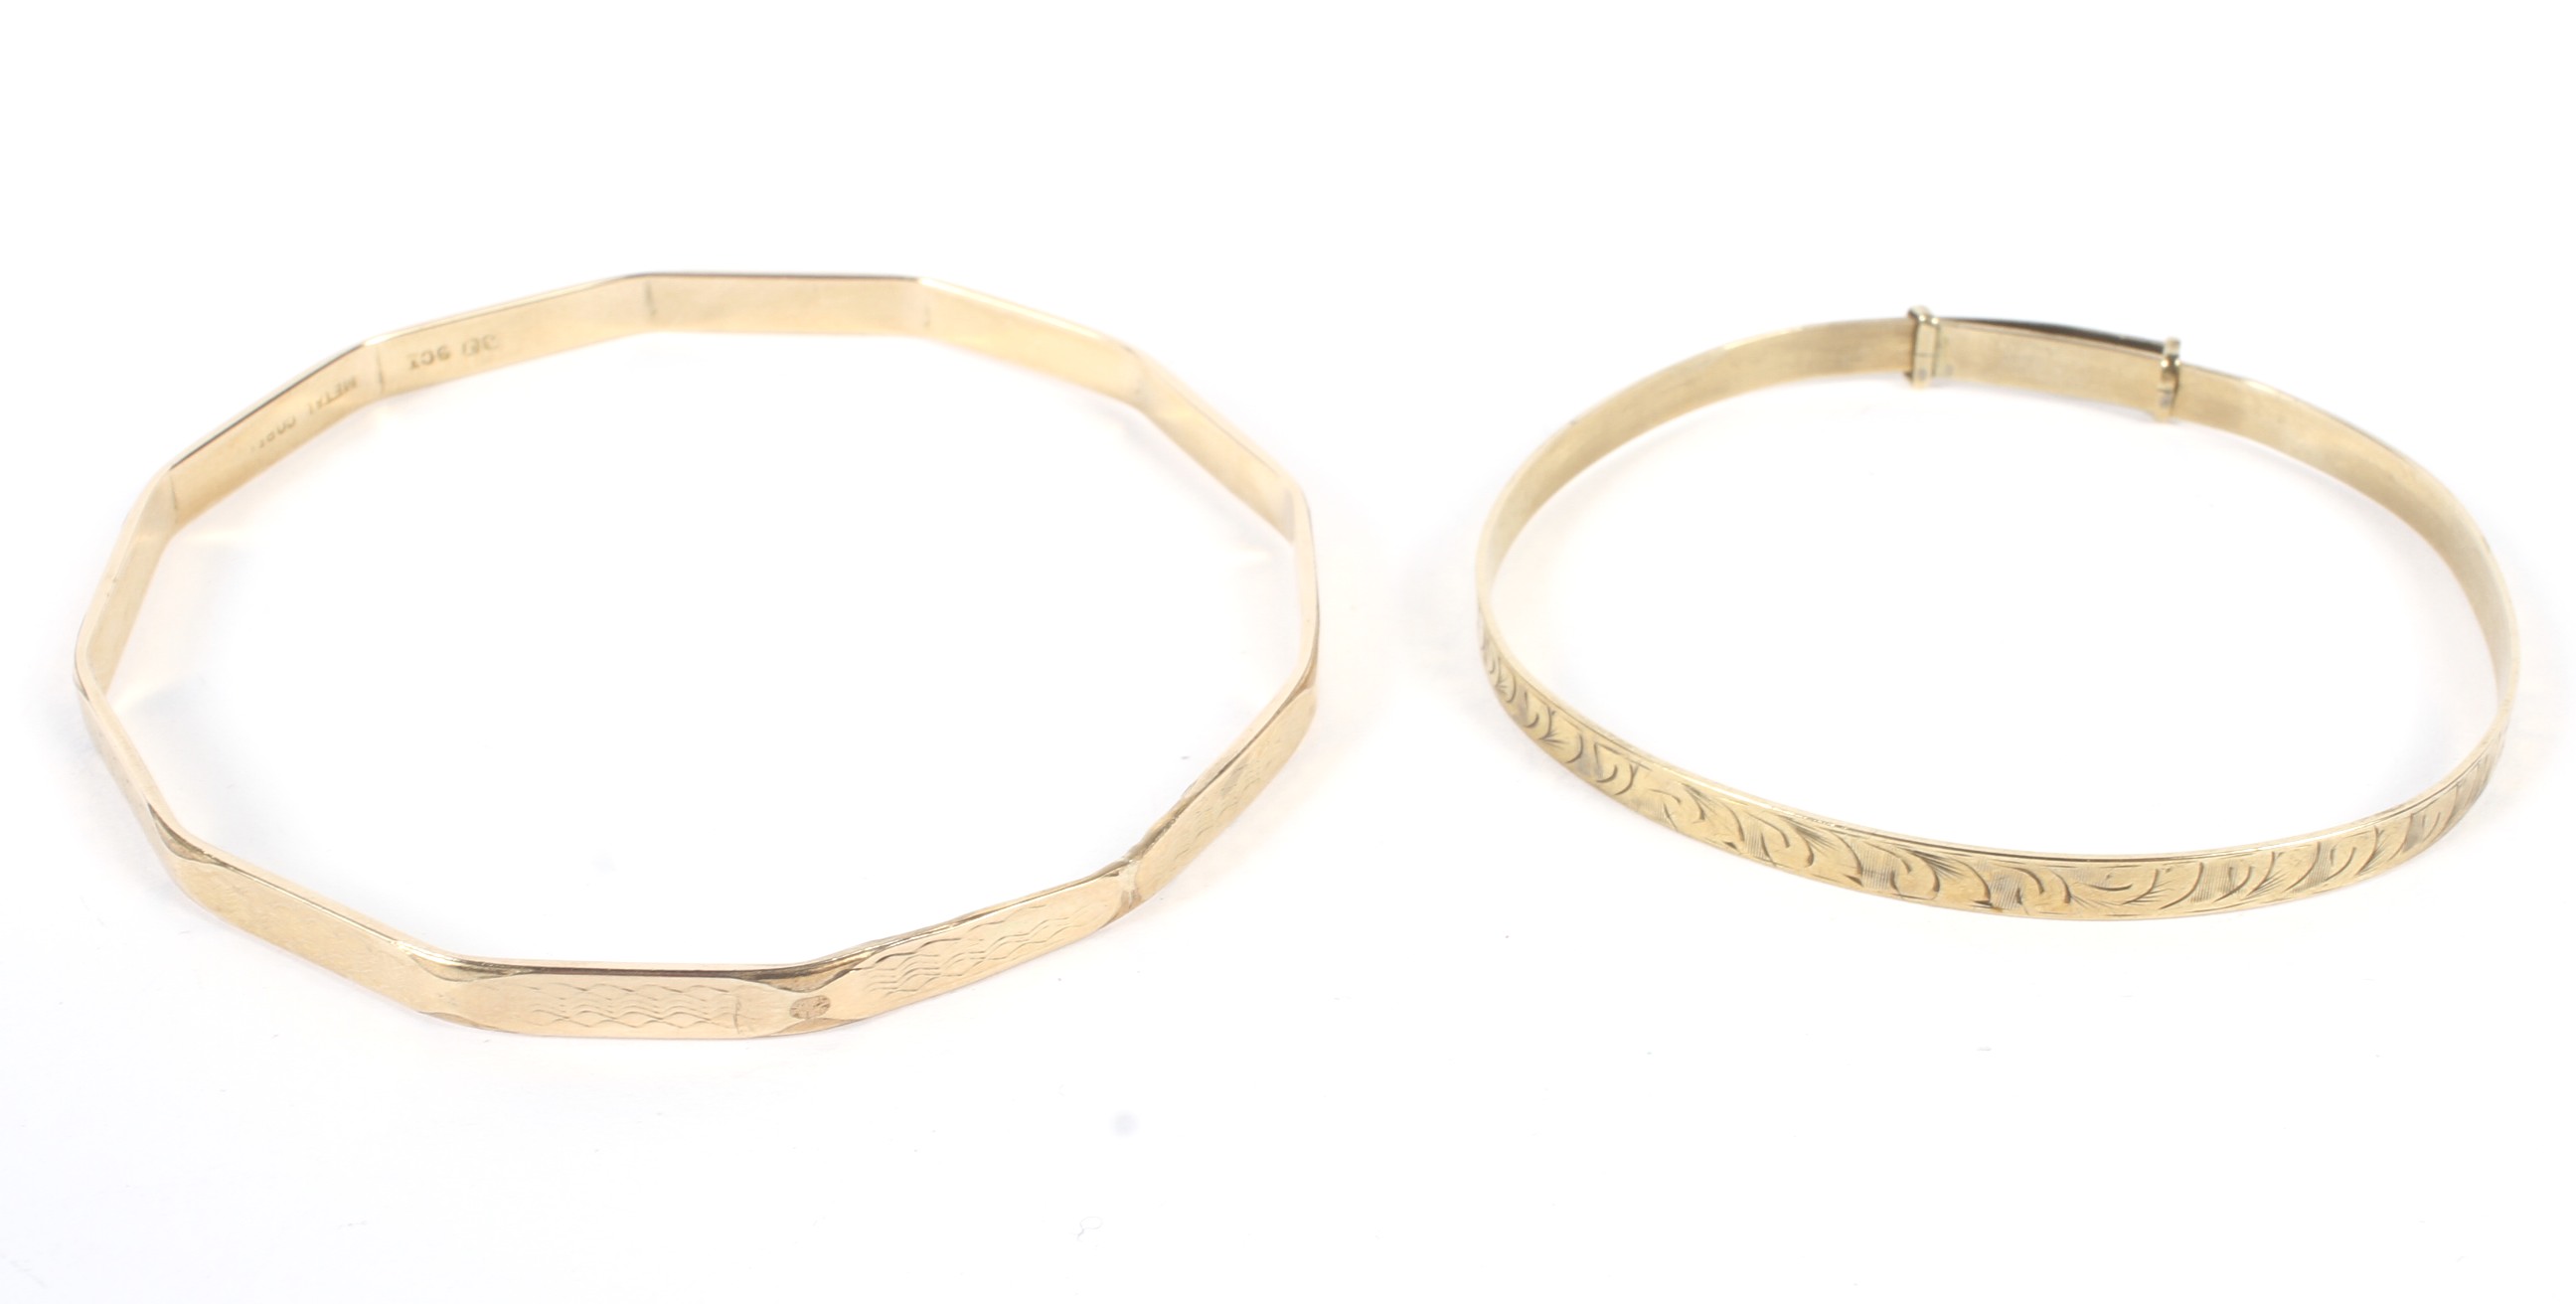 Two vintage ladies 9ct gold plated bangles. Both with metal core and engraved decoration, 12. - Image 2 of 3